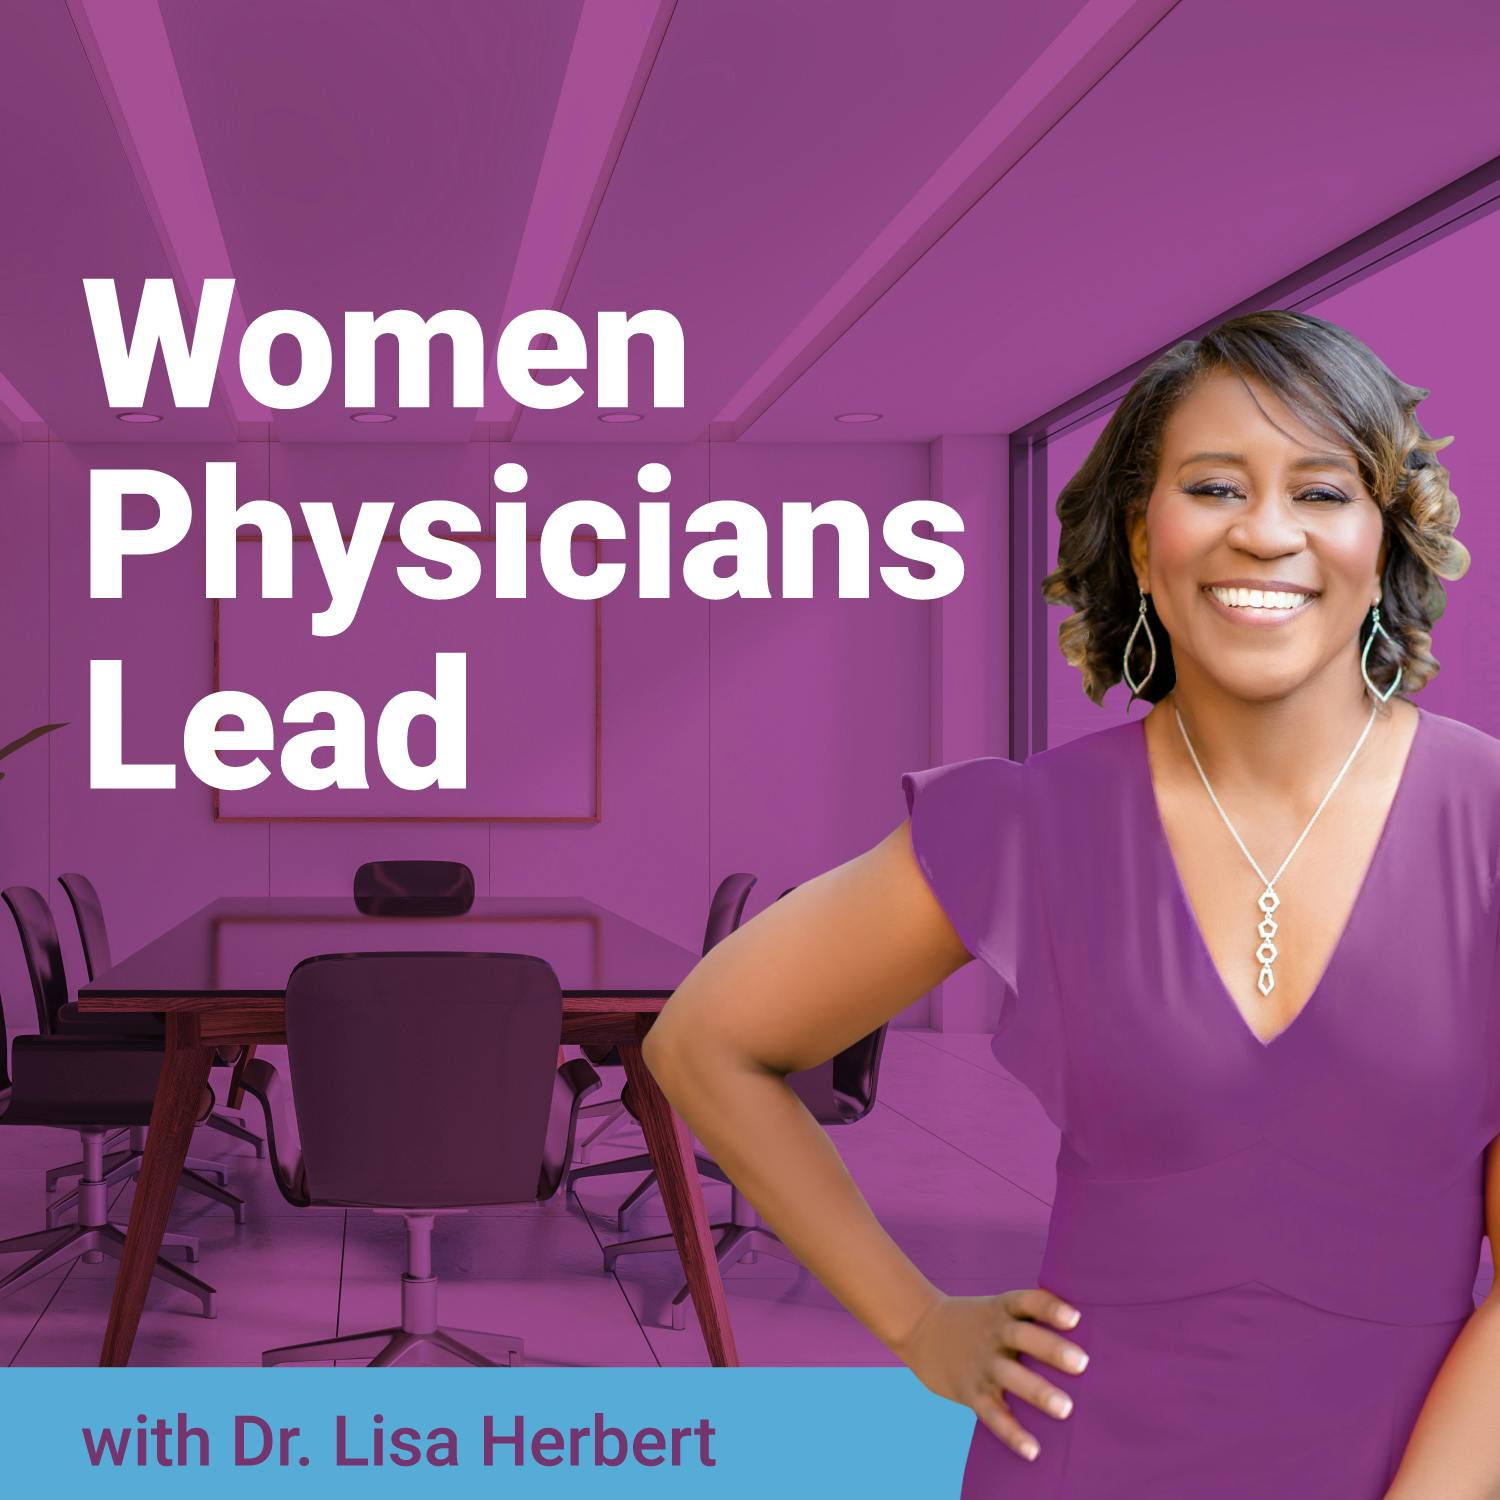 Dr. Denise Johnson Miller: A Surgeon's Mission To Help Prepare the Next Generation of Female Leaders